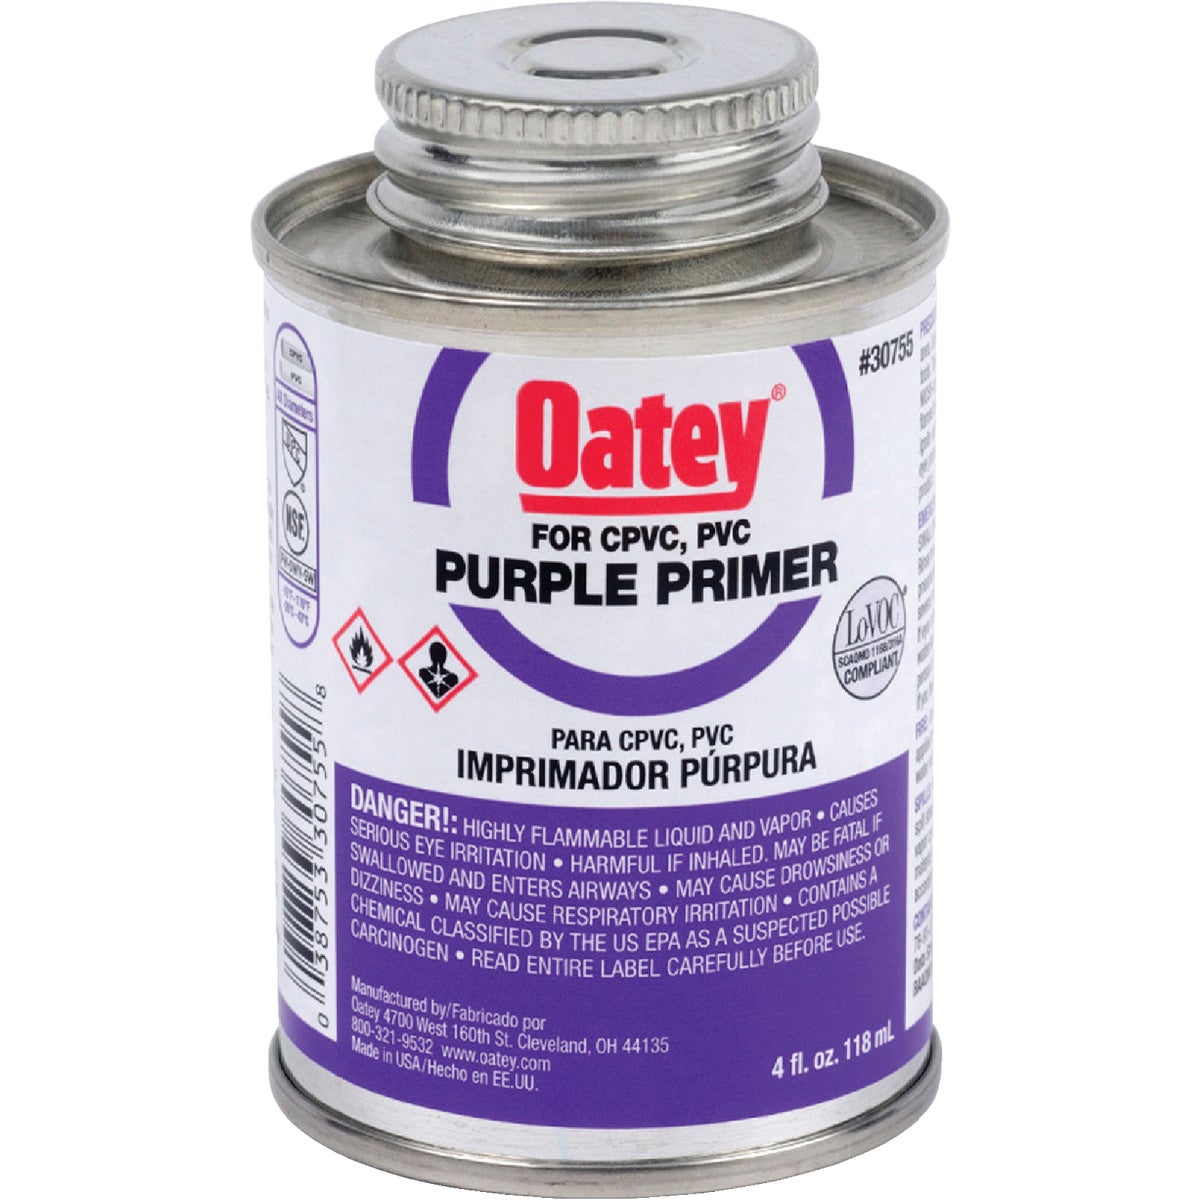 Item 425025, A purple-tinted aggressive primer recommended for use on PVC and CPVC pipe 